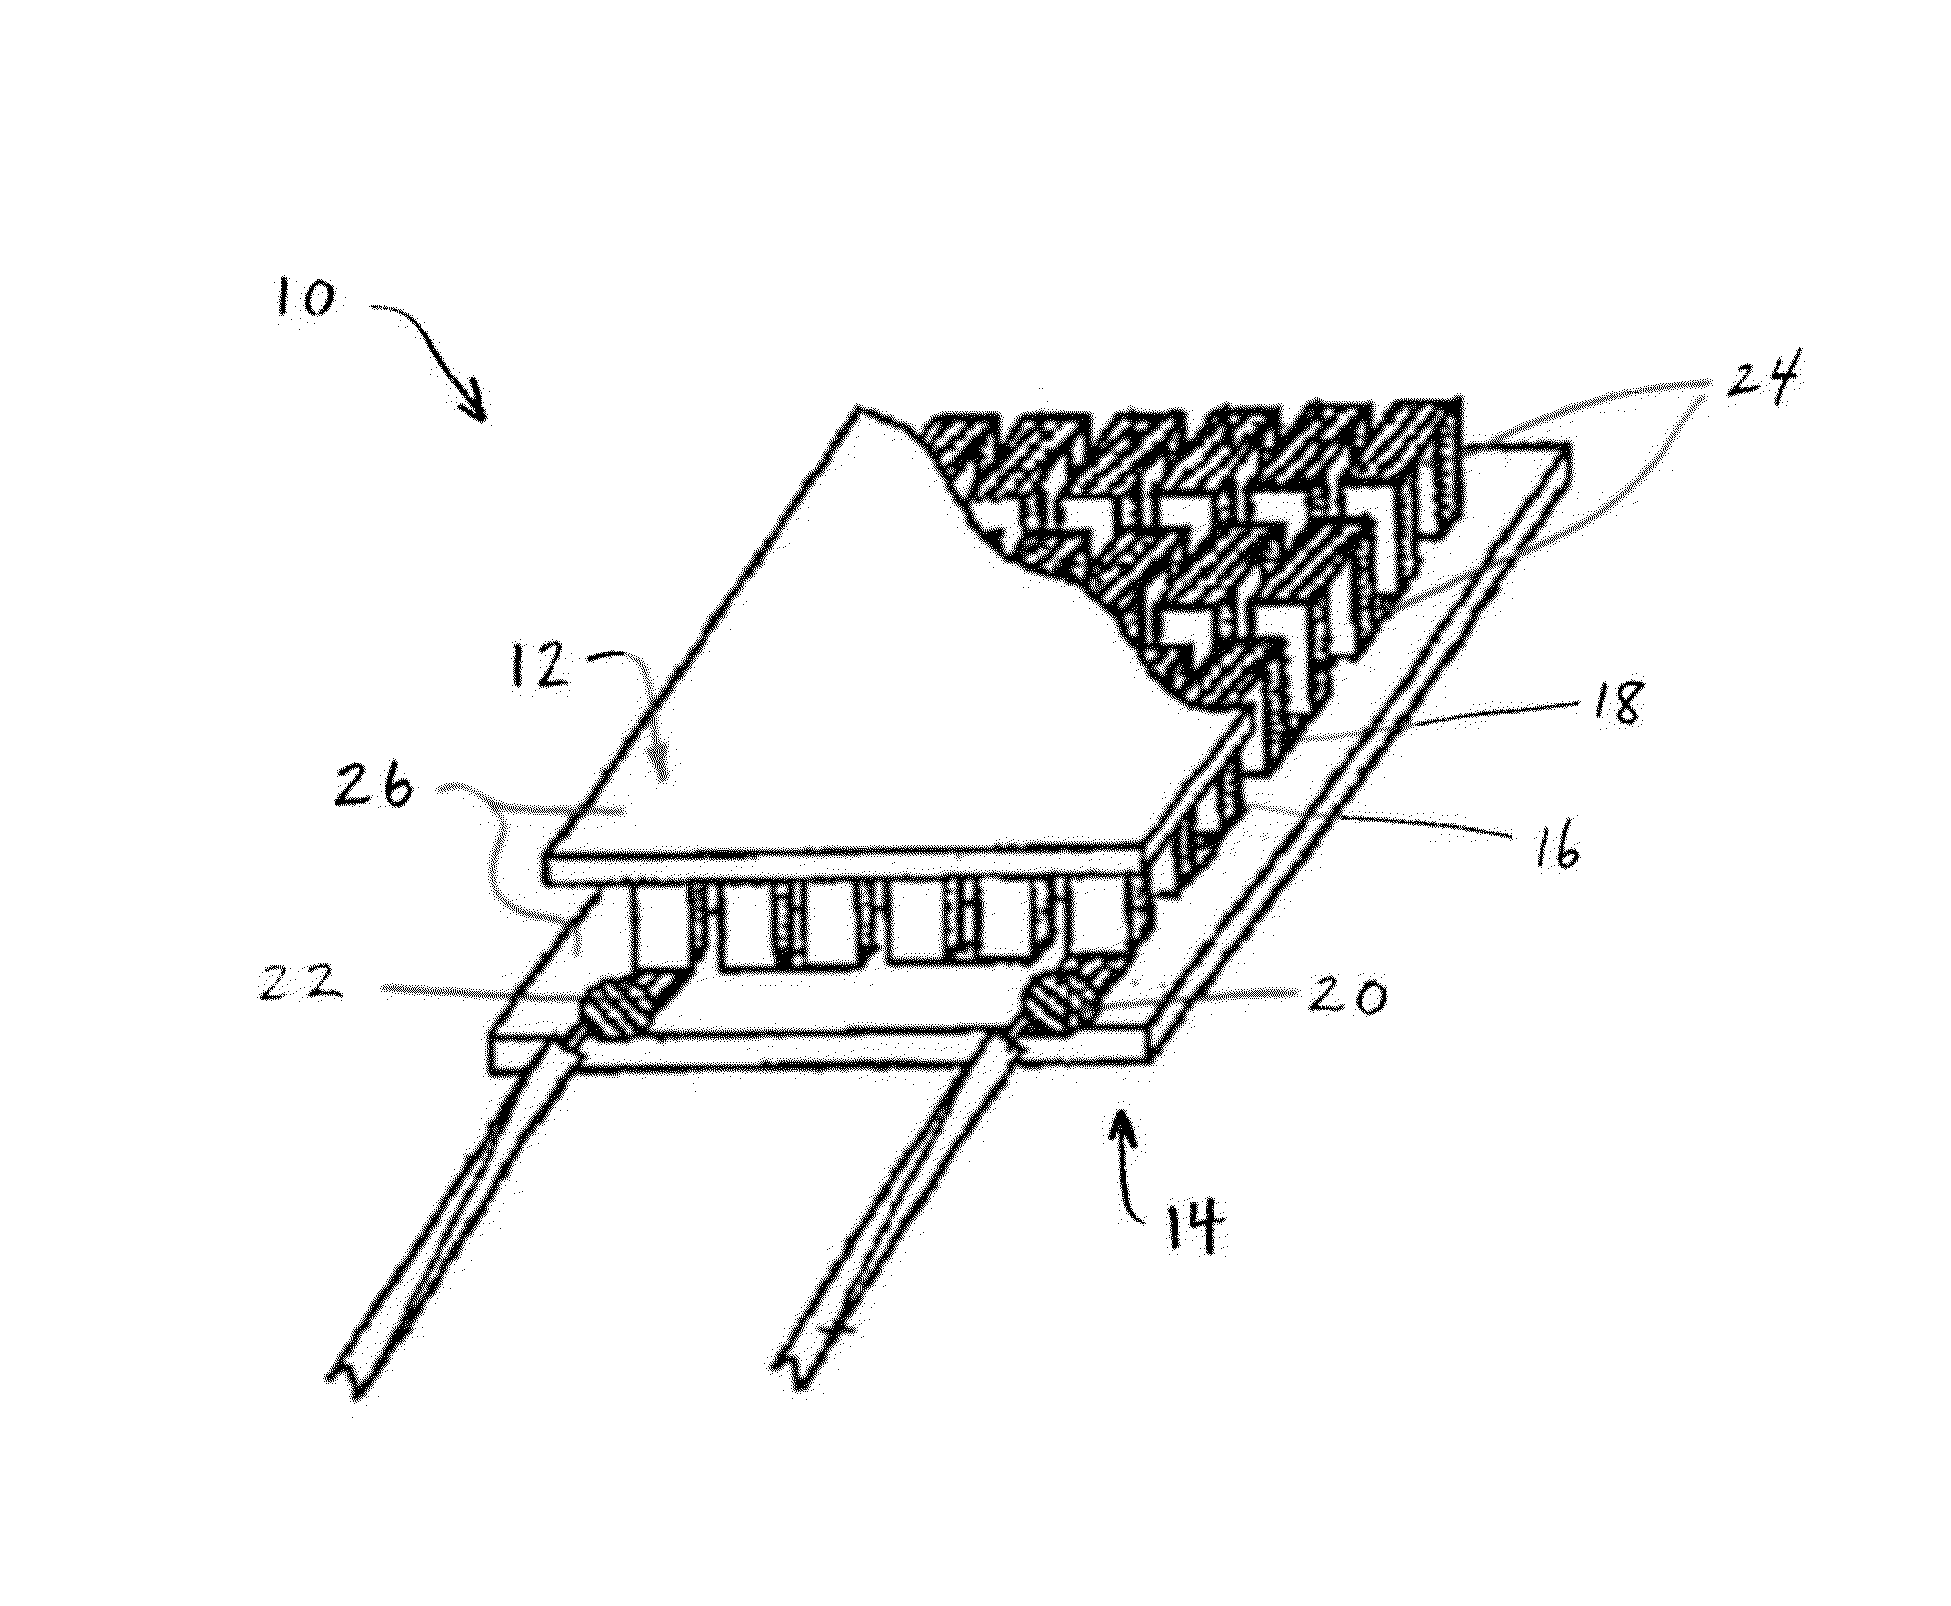 Apparel with integral heating and cooling device